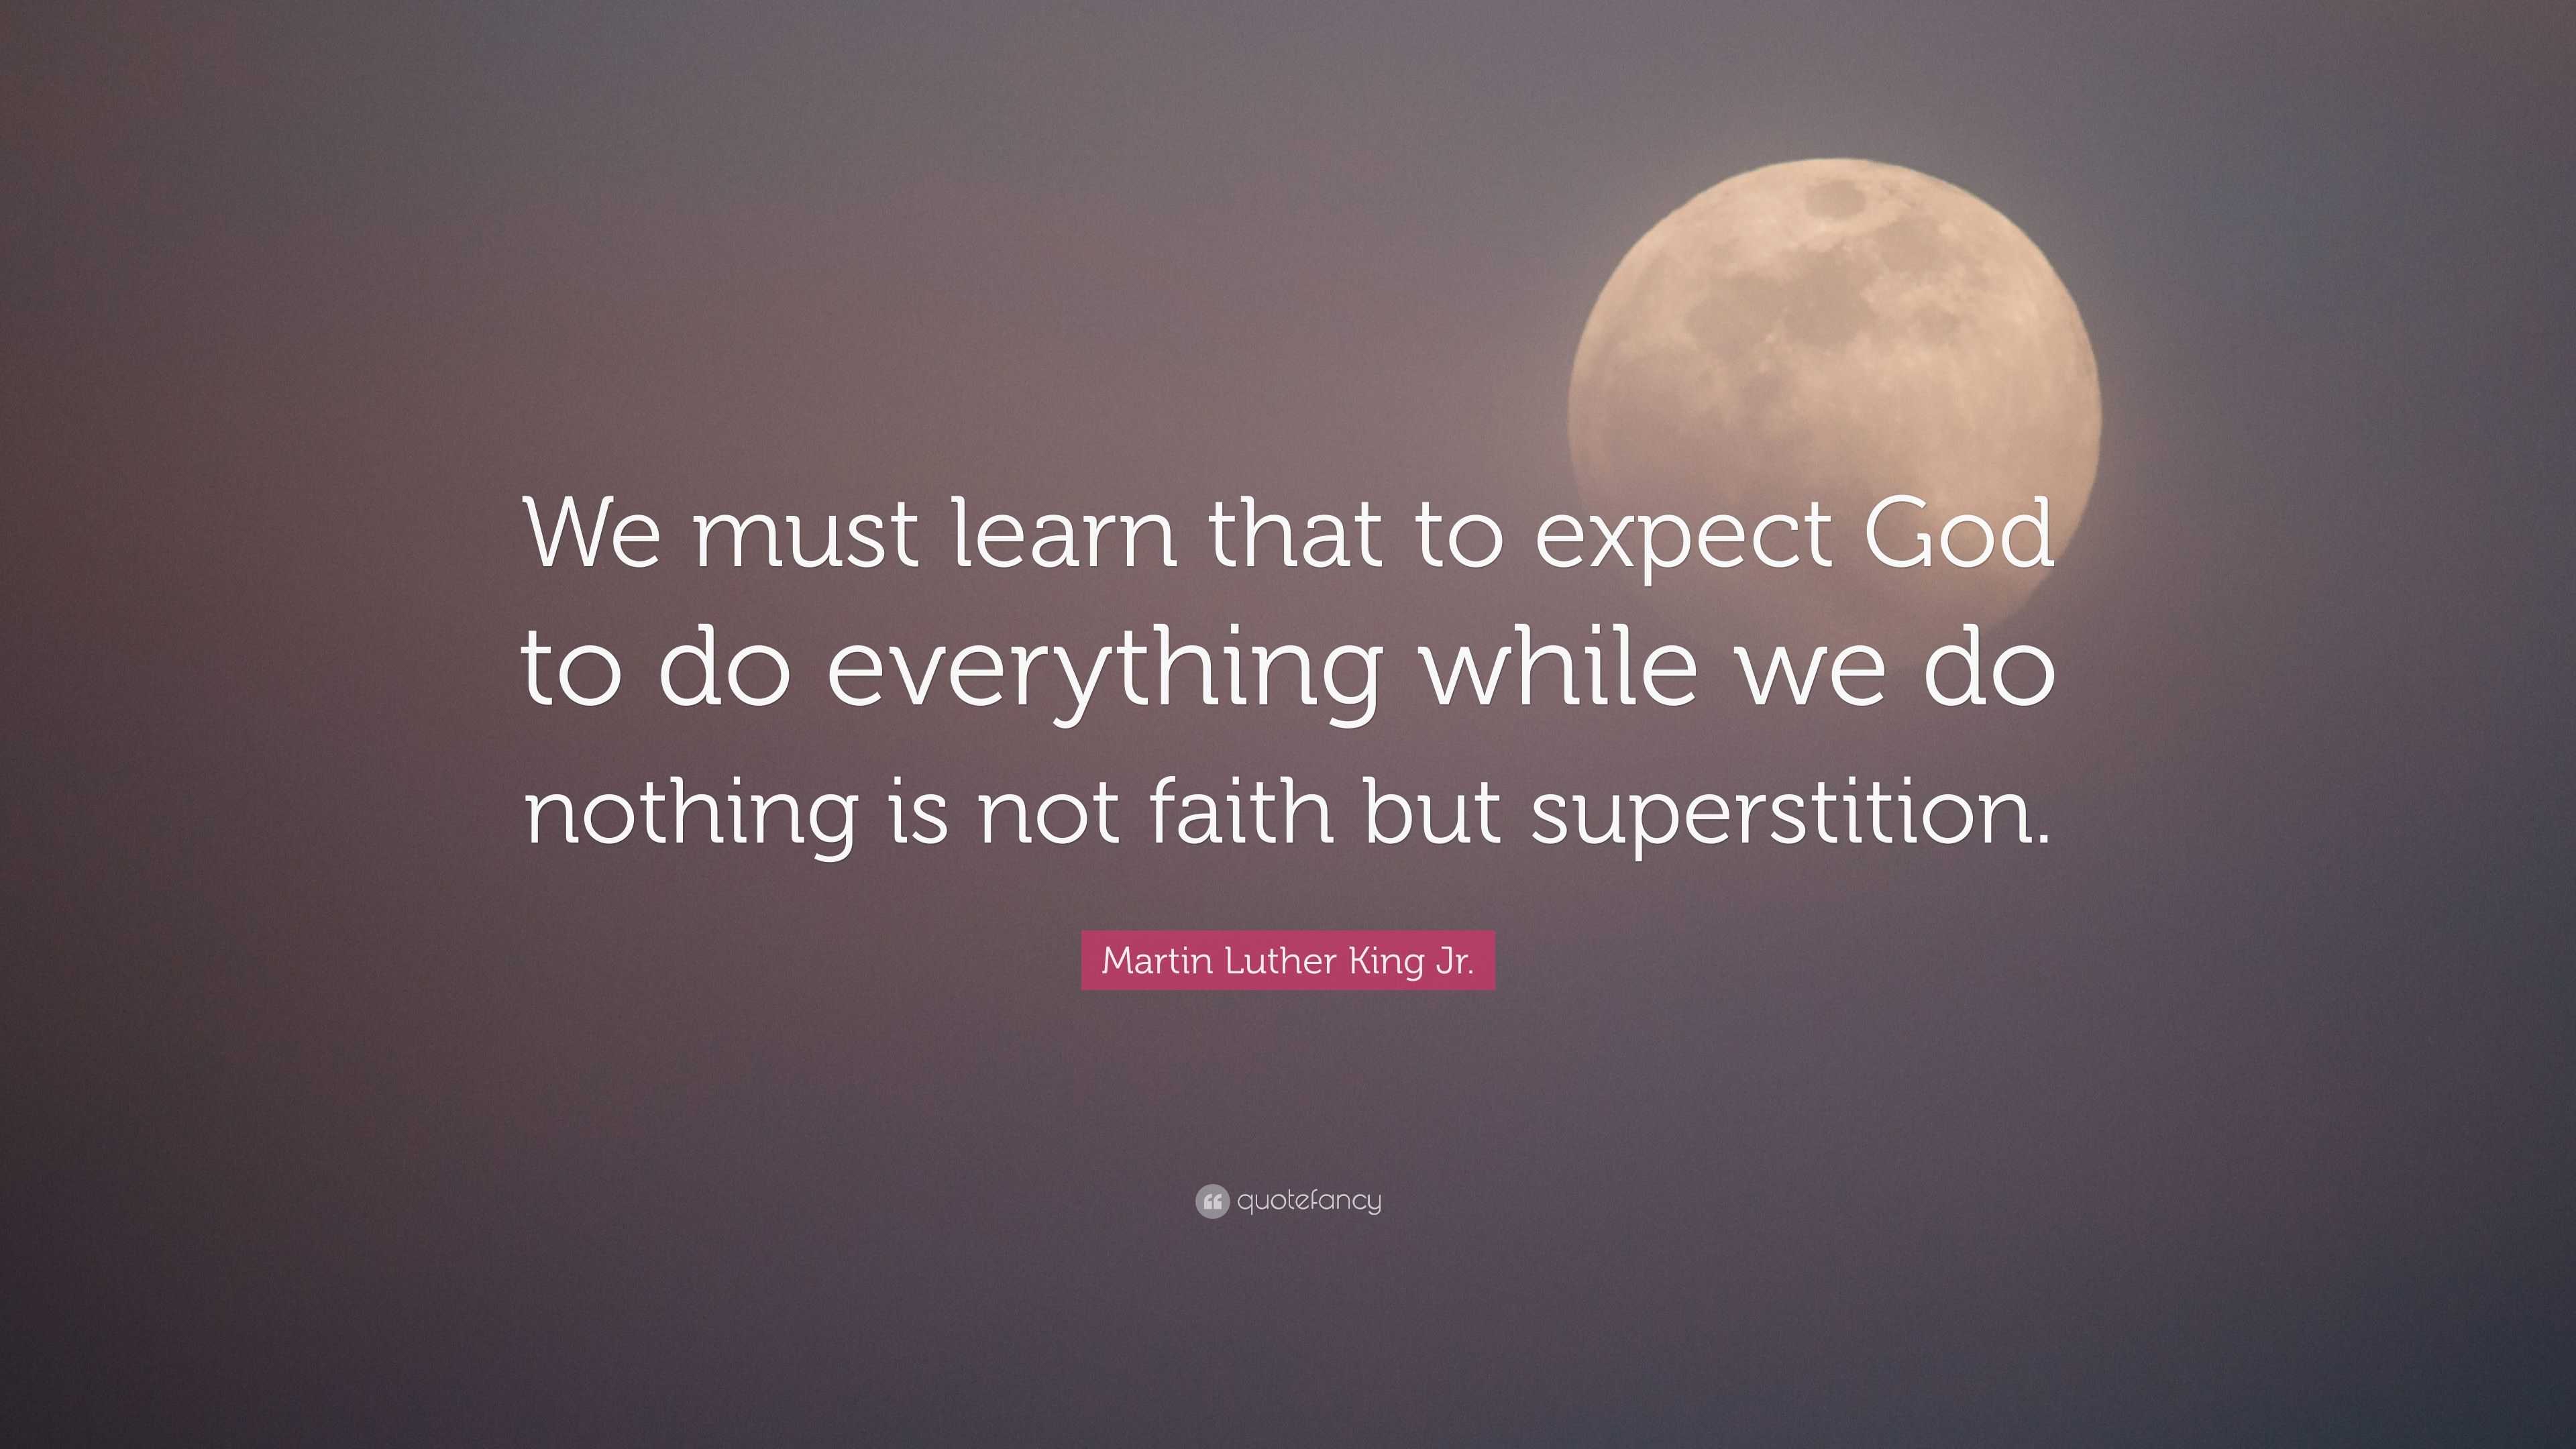 Martin Luther King Jr. Quote: “We must learn that to expect God to do ...